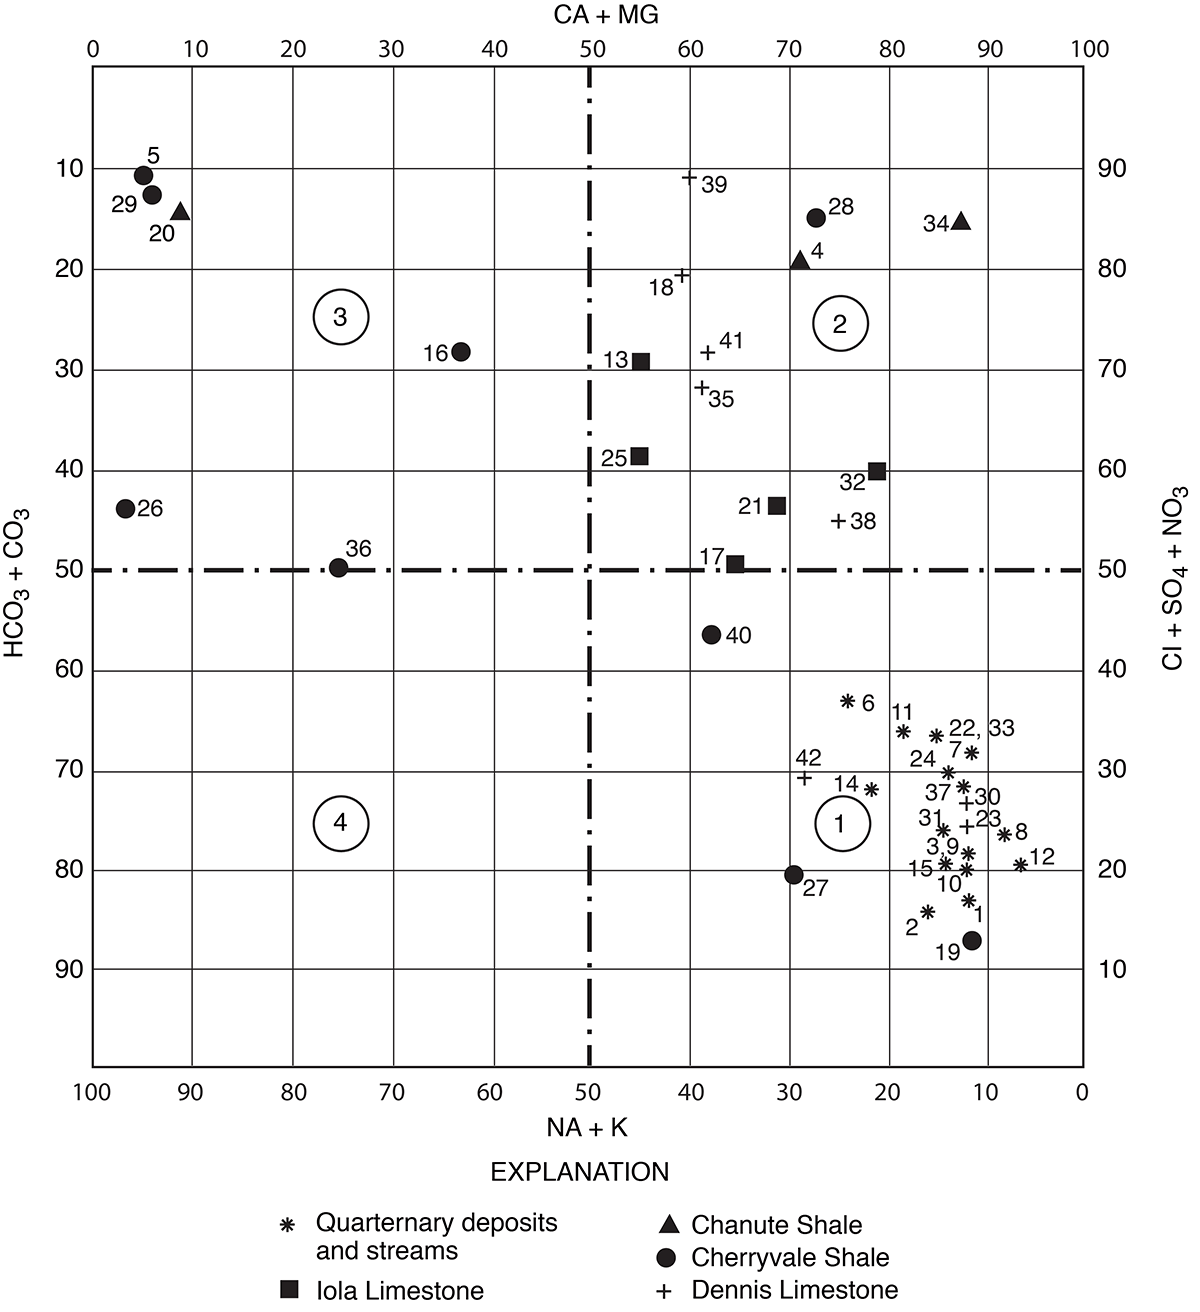 Piper diagram with water samples plotted to indicate chemical qualities.